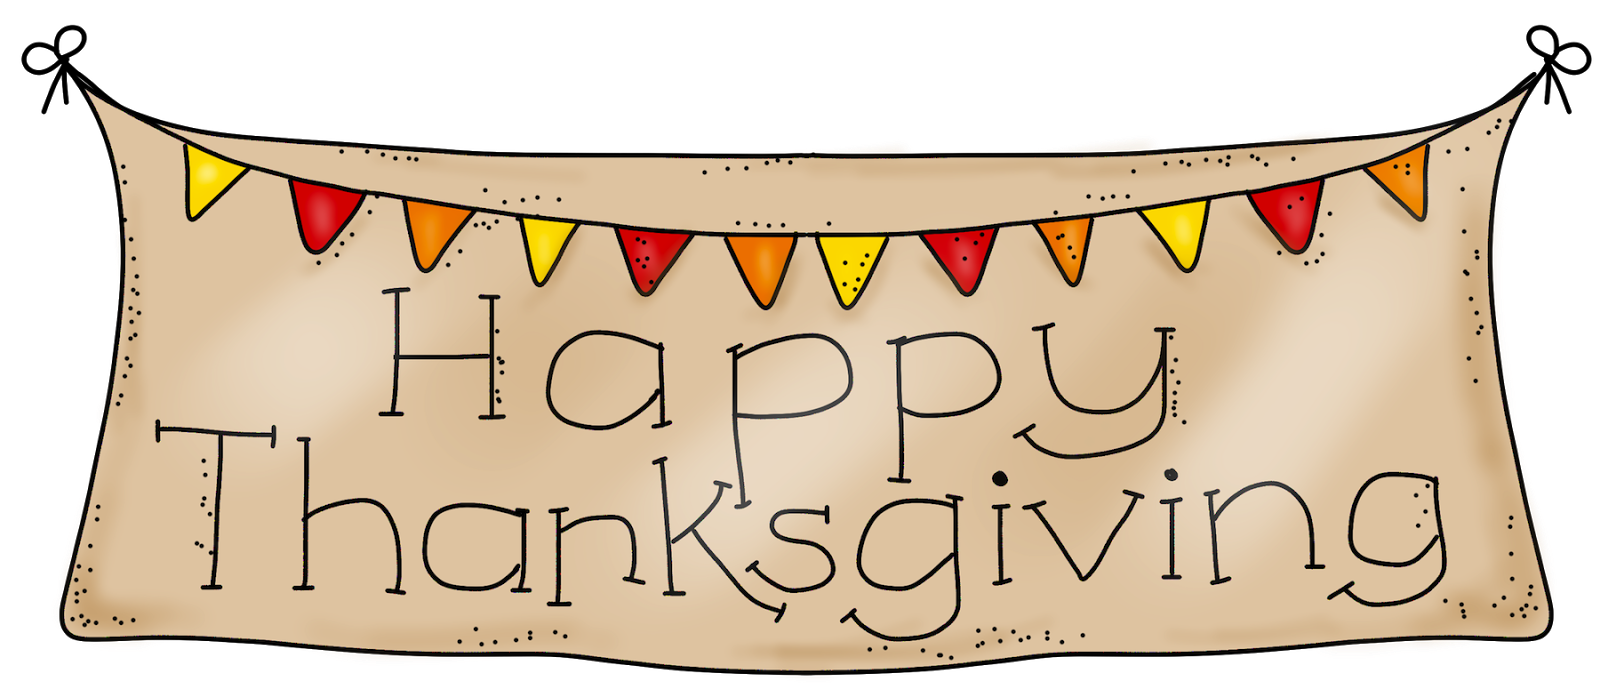 Thanksgiving clipart printables - ClipartFest graphic stock